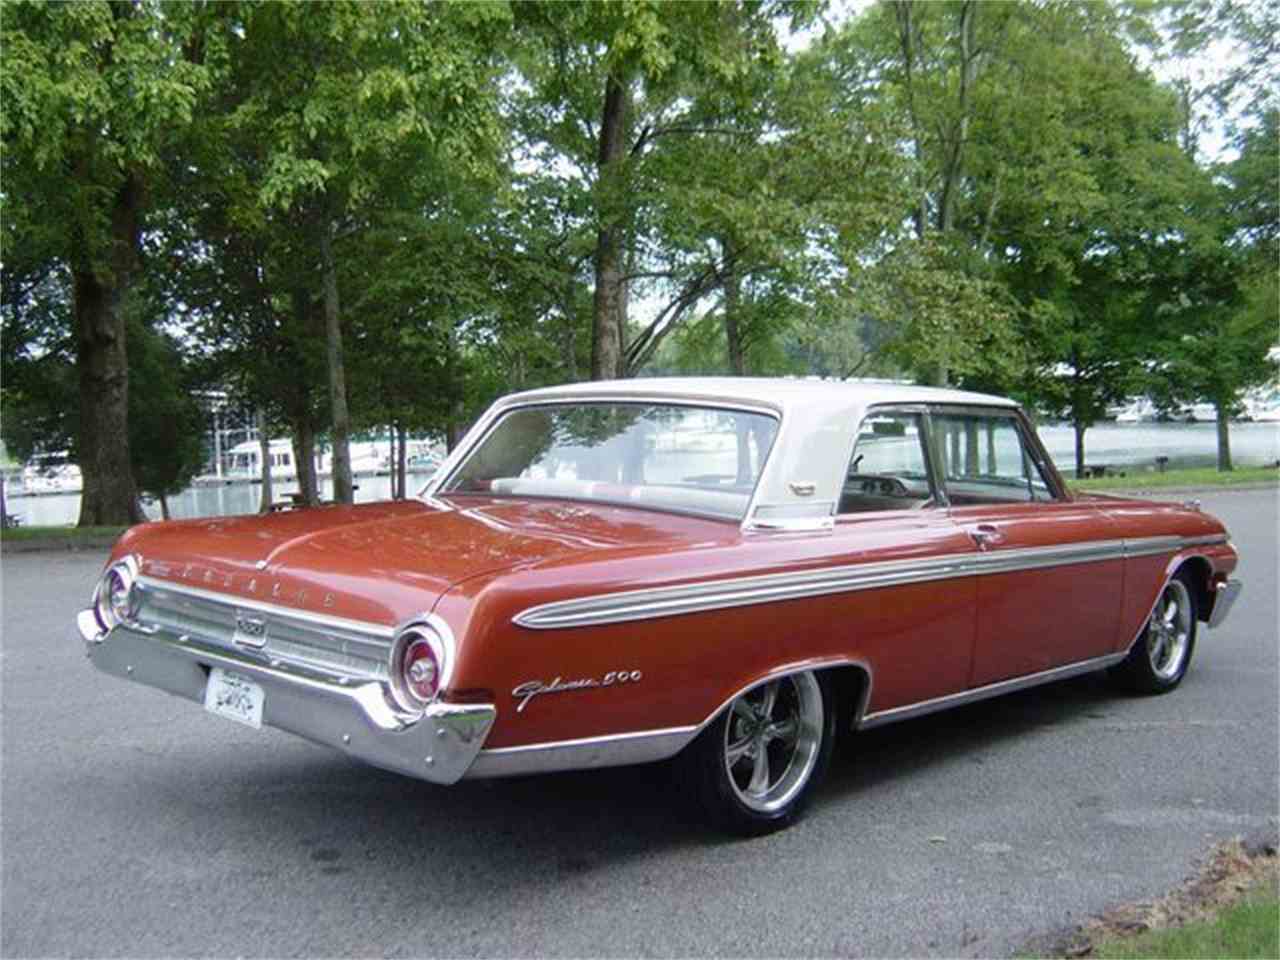 1962 Ford Galaxie 500 for Sale | ClassicCars.com | CC-1014891